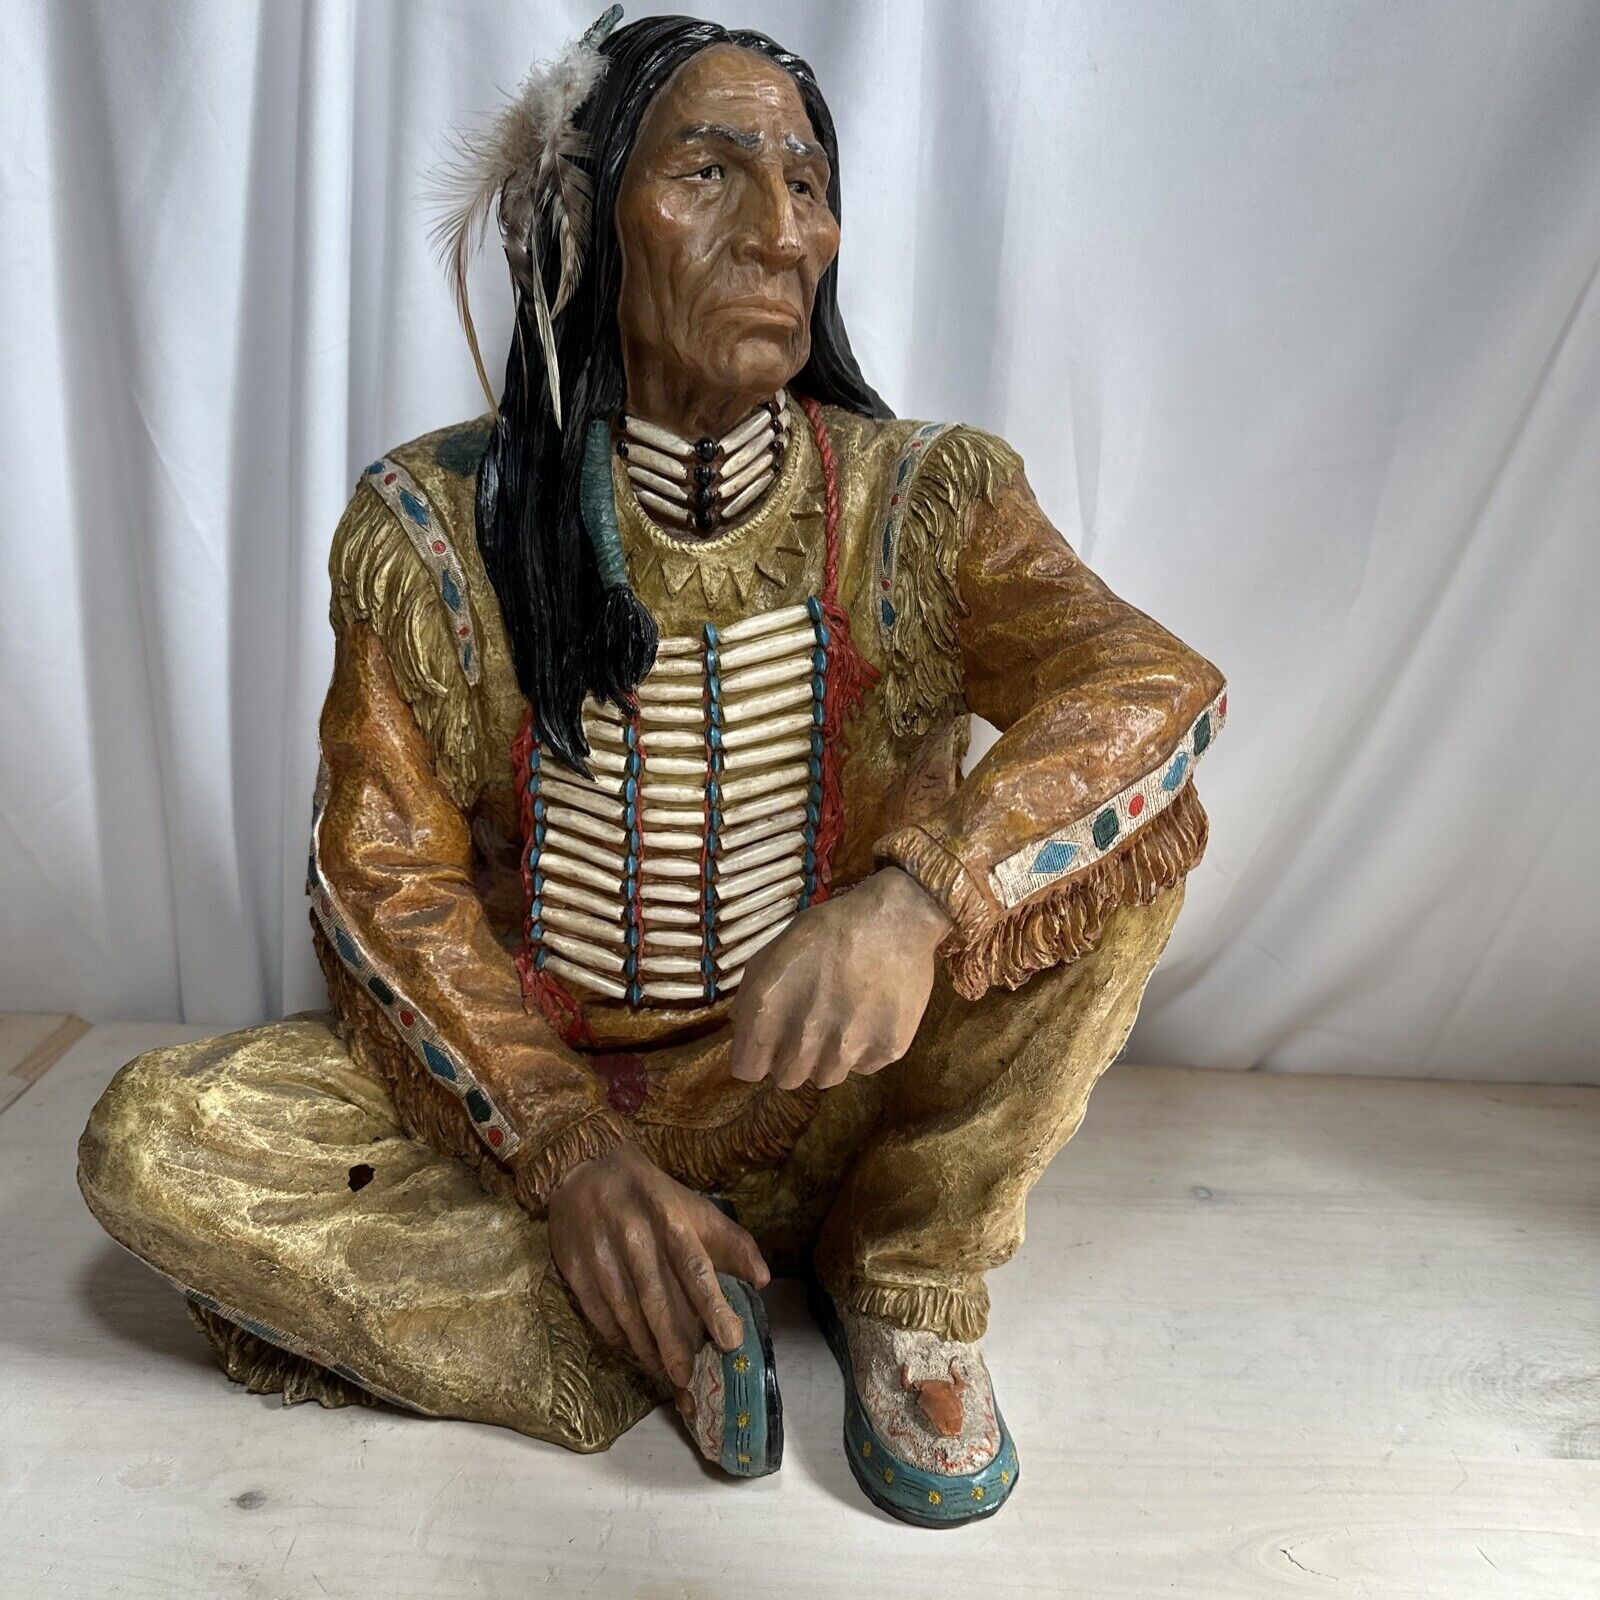 Vintage Sitting Man Indian Sculpture 17x13 (2 Small Holes In Leg)